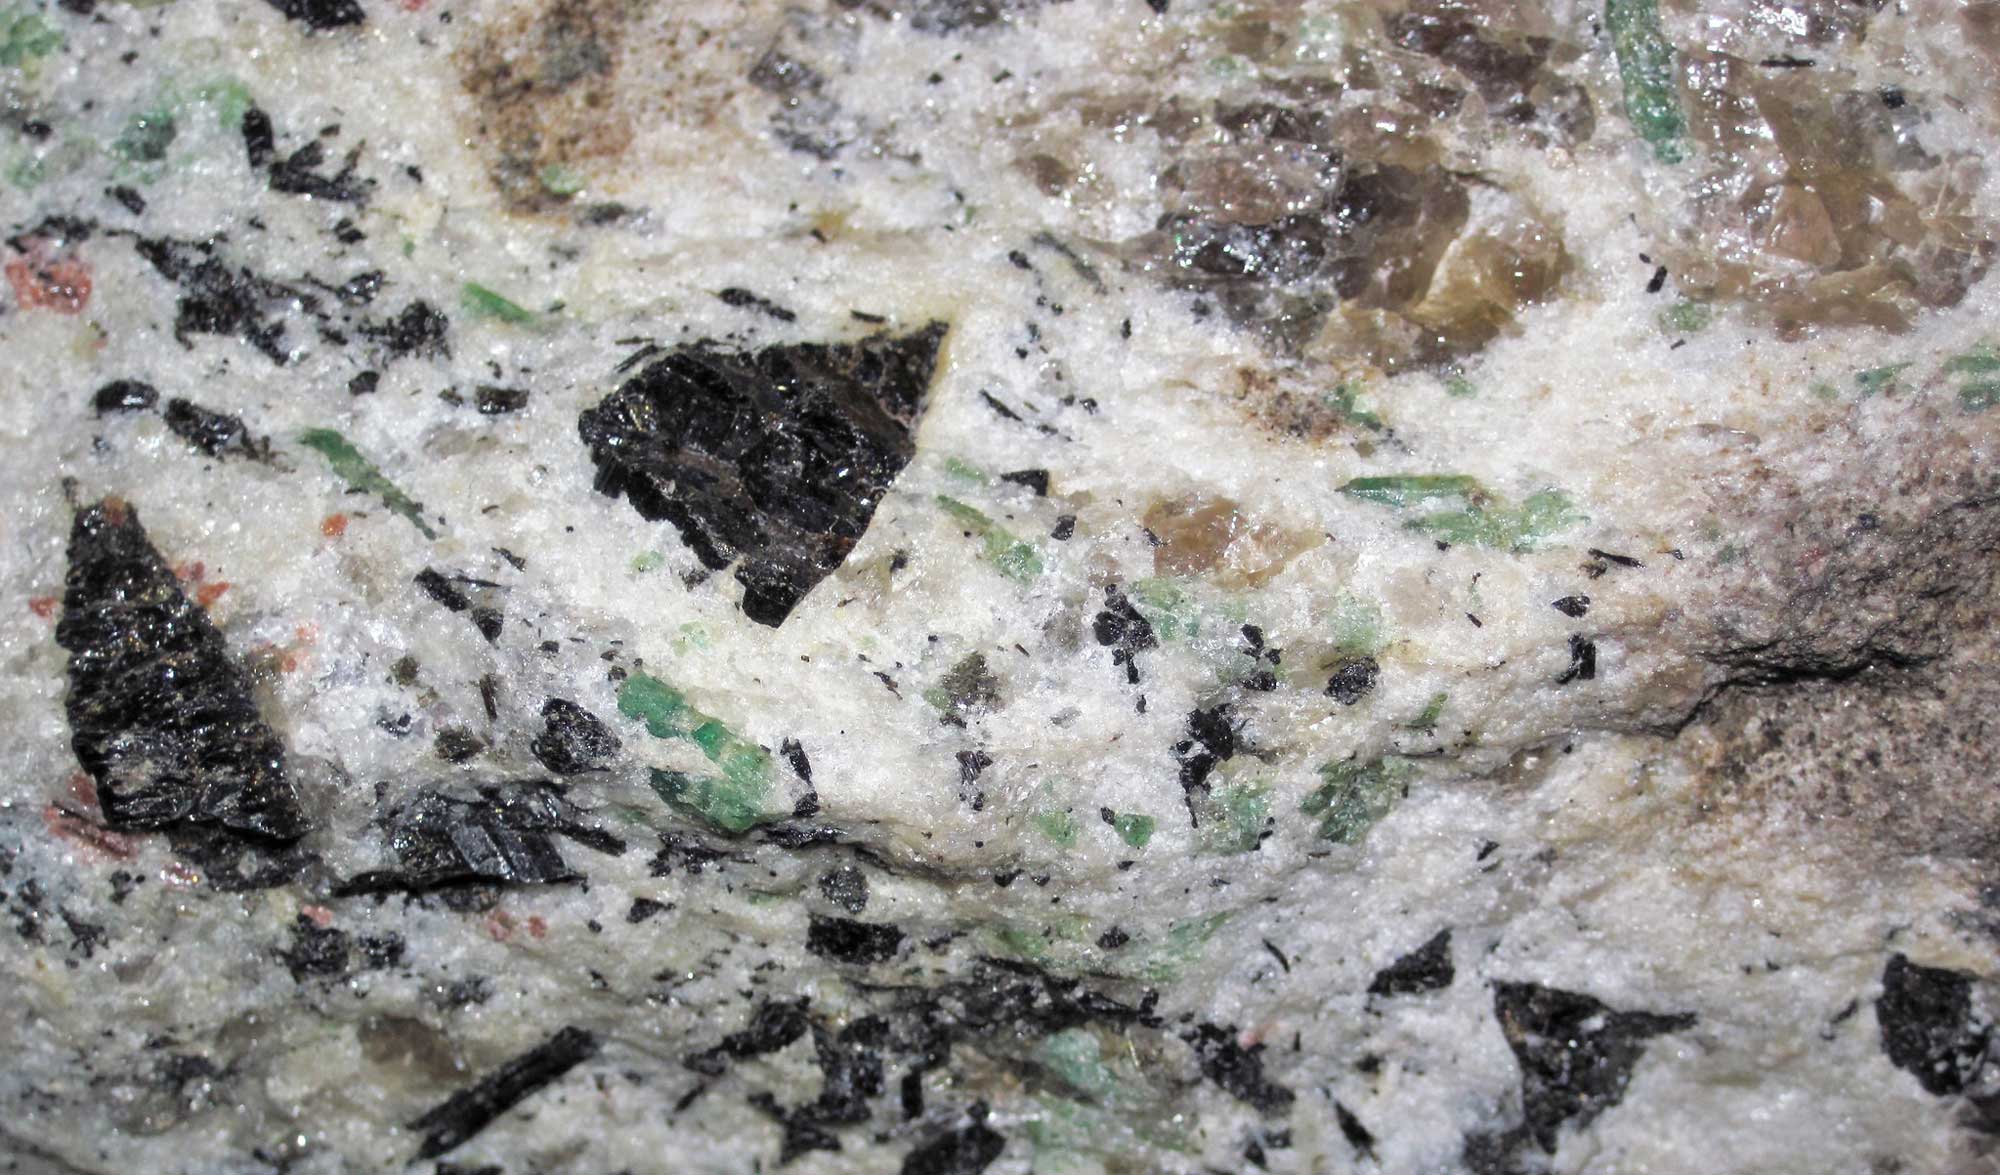 Photograph of small emeralds in a sample of pegmatitic granite from North Carolina.